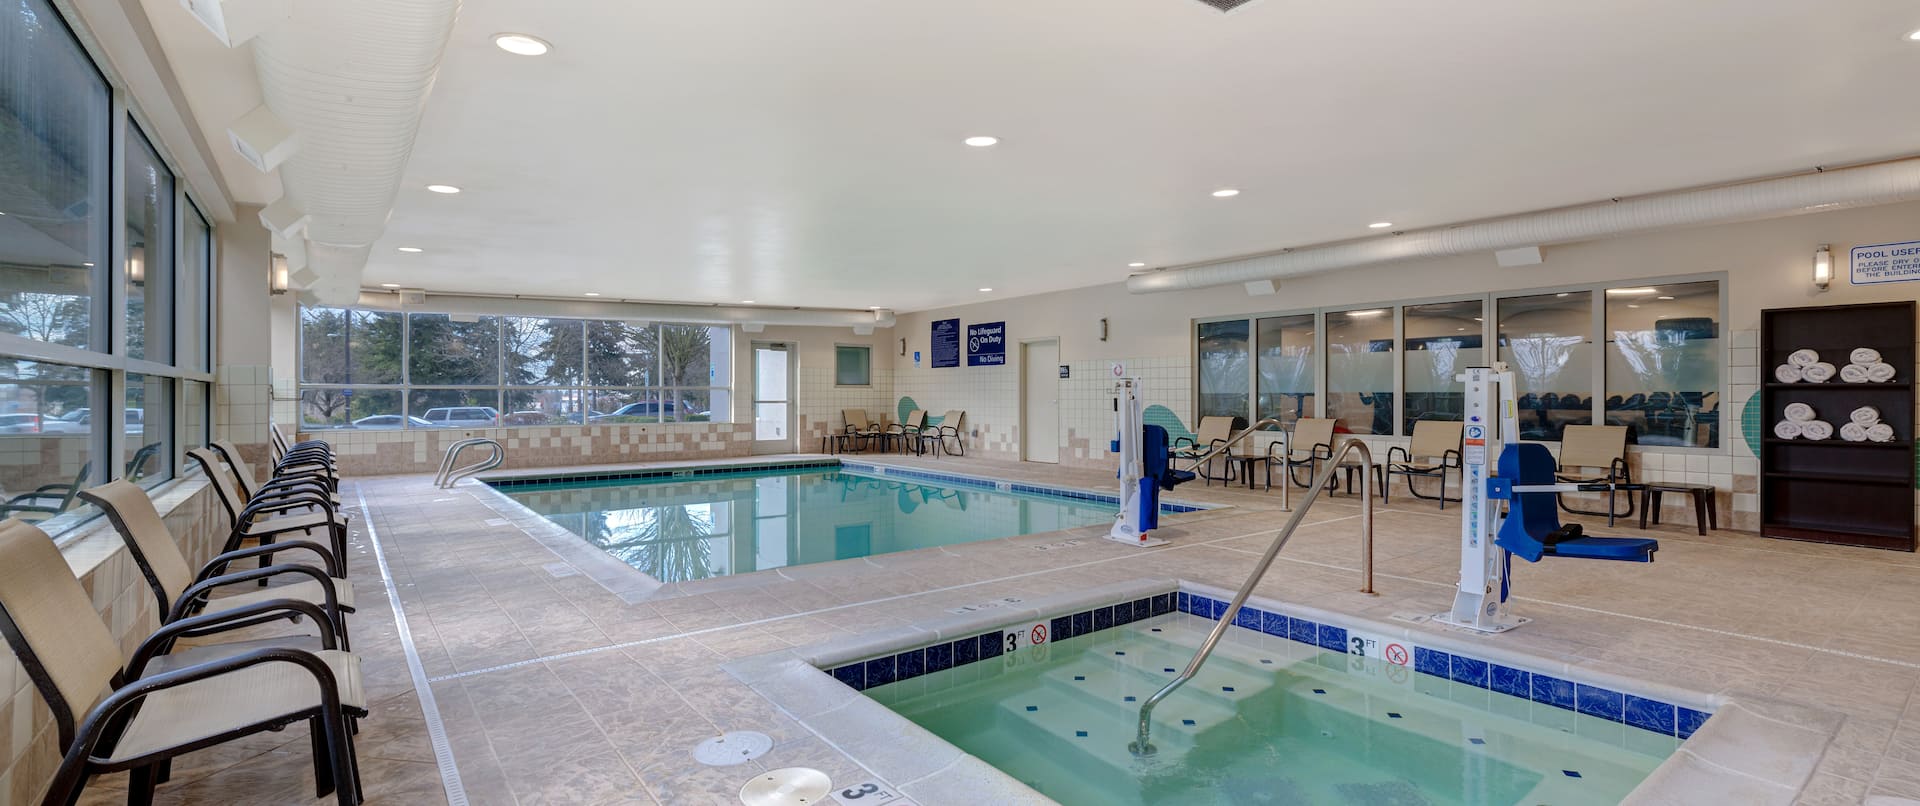 indoor swimming pool and hot tub